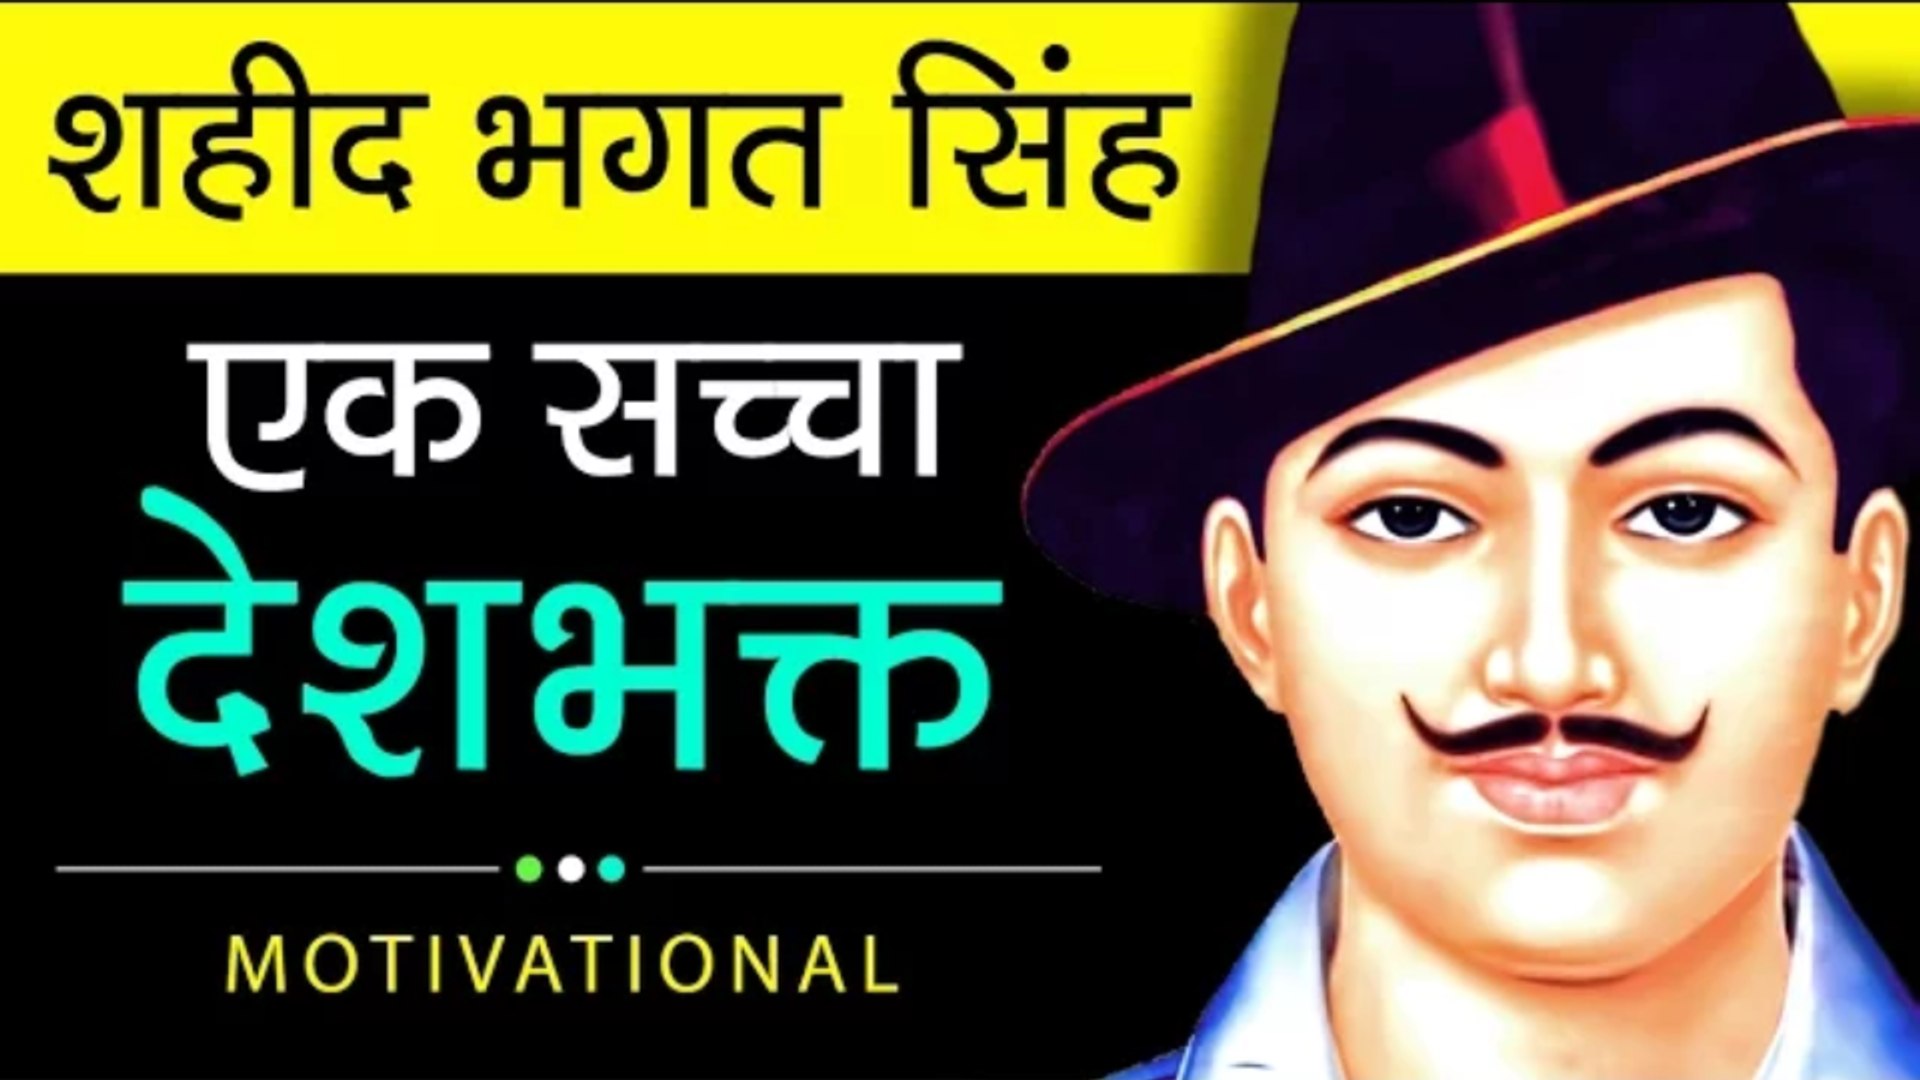 Shaheed Bhagat Singh Biography In Hindi About History Of Freedom Fighter -  video Dailymotion